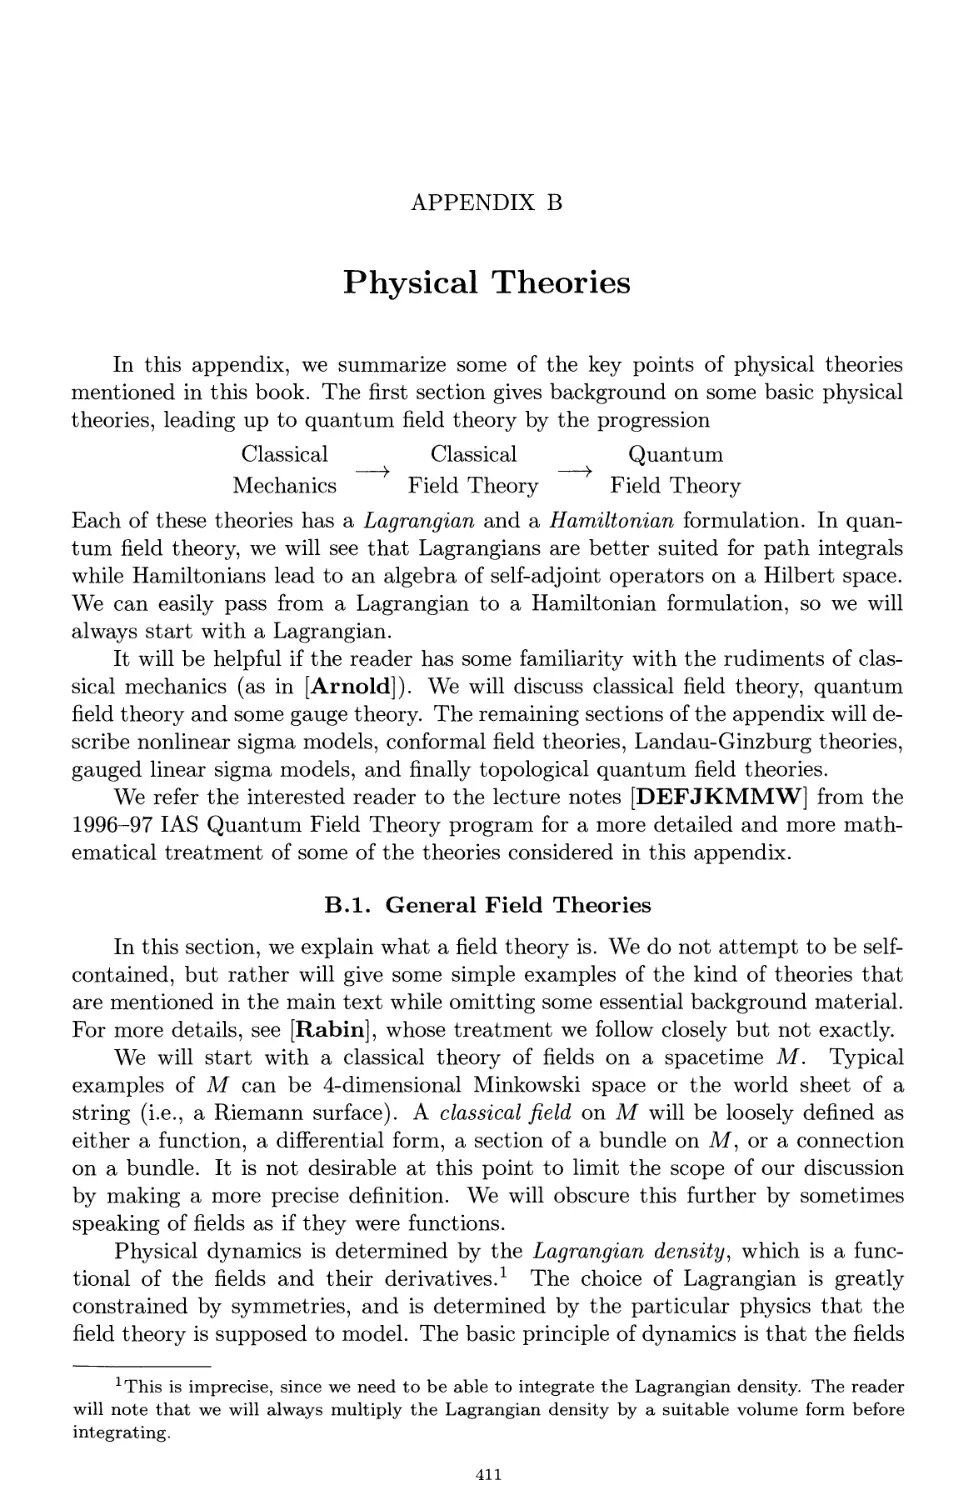 Appendix B. Physical Theories